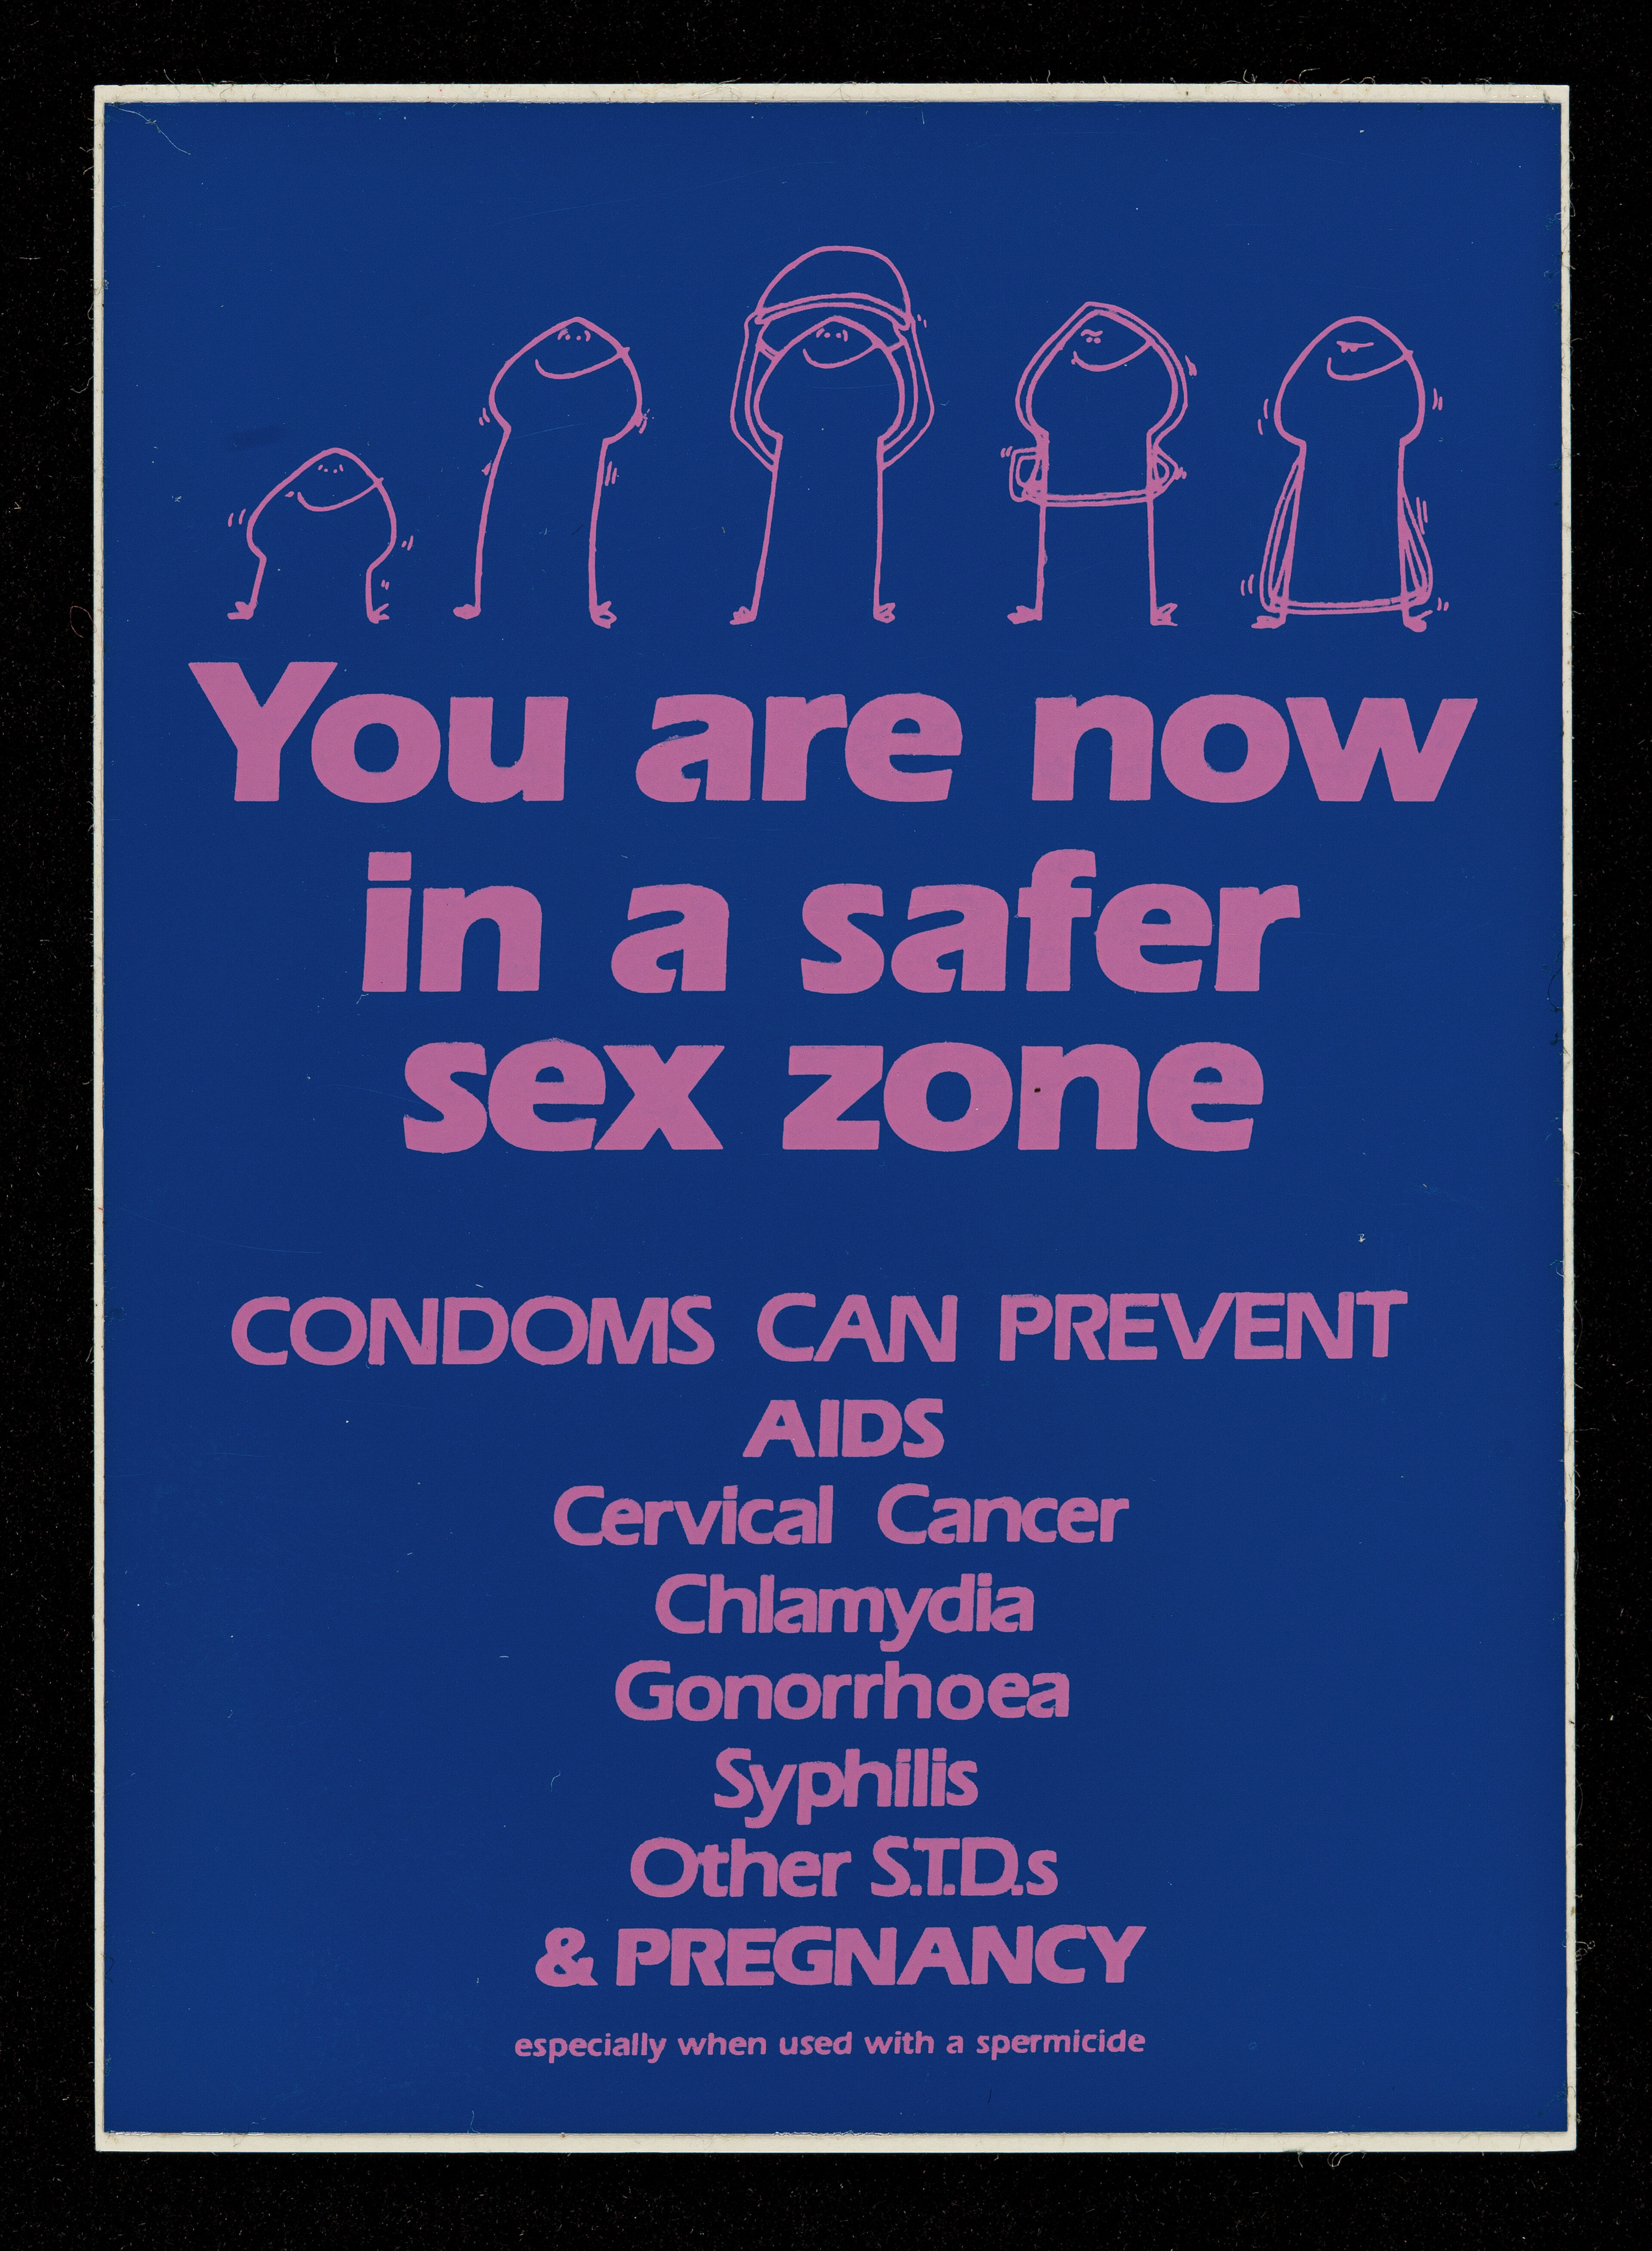 You are now in a safer sex zone : condoms can prevent AIDS, cervical cancer, chlamydia, gonorrhoea, syphilis, other S.T.D.s & pregnancy.